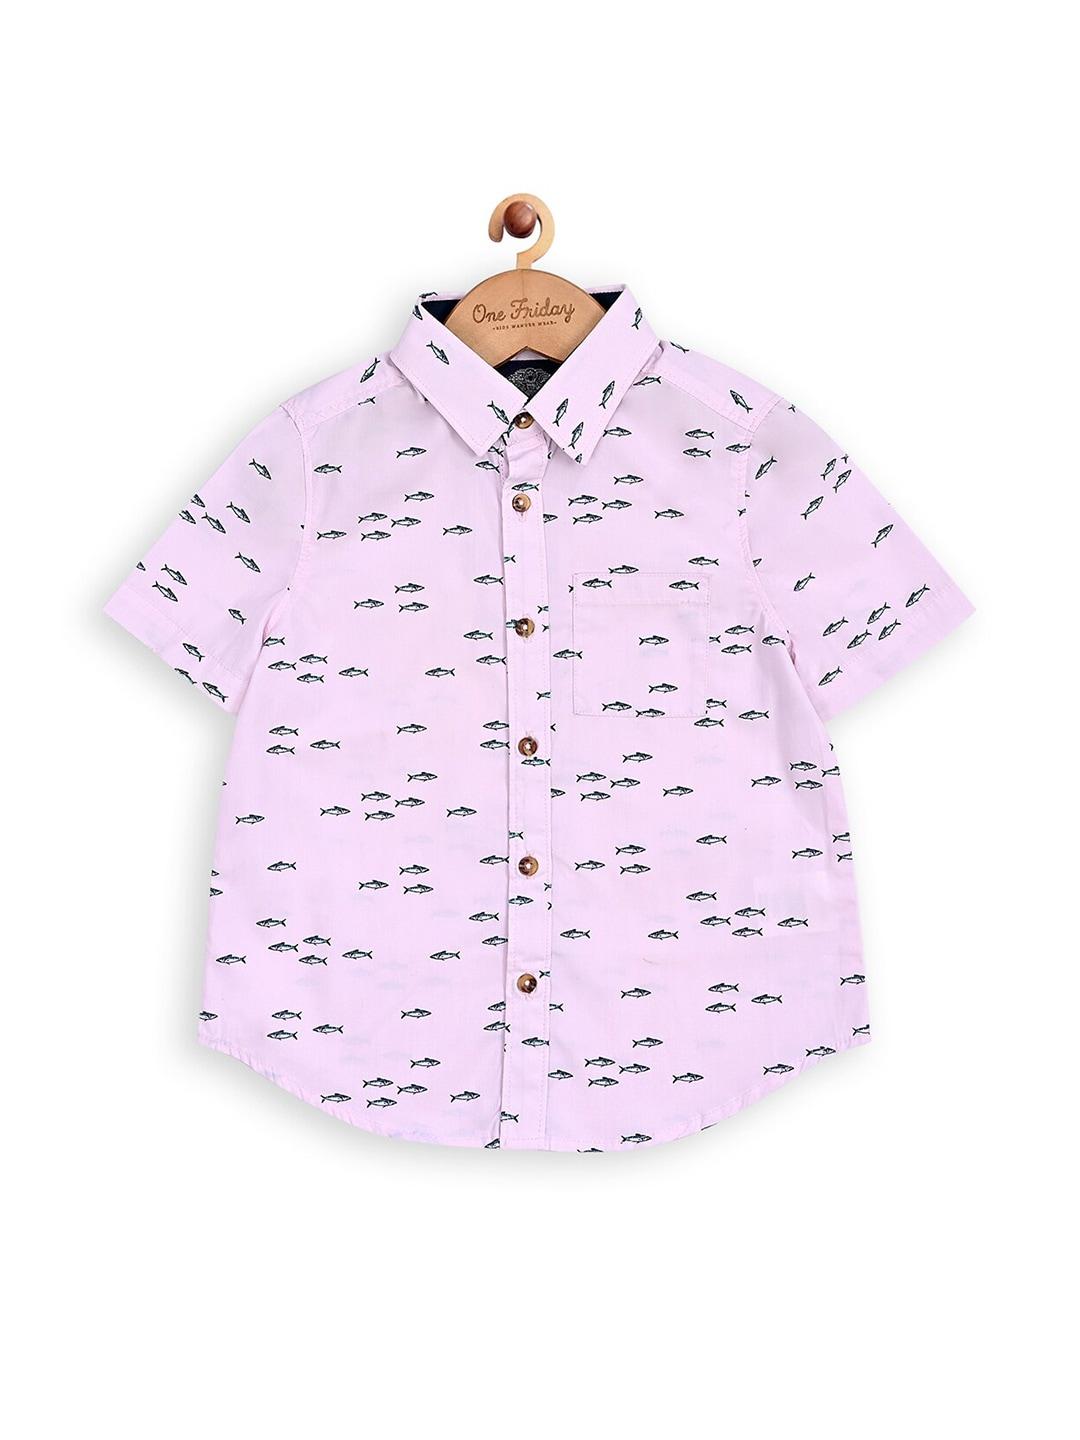 One Friday Boys Classic Opaque Printed Casual Shirt